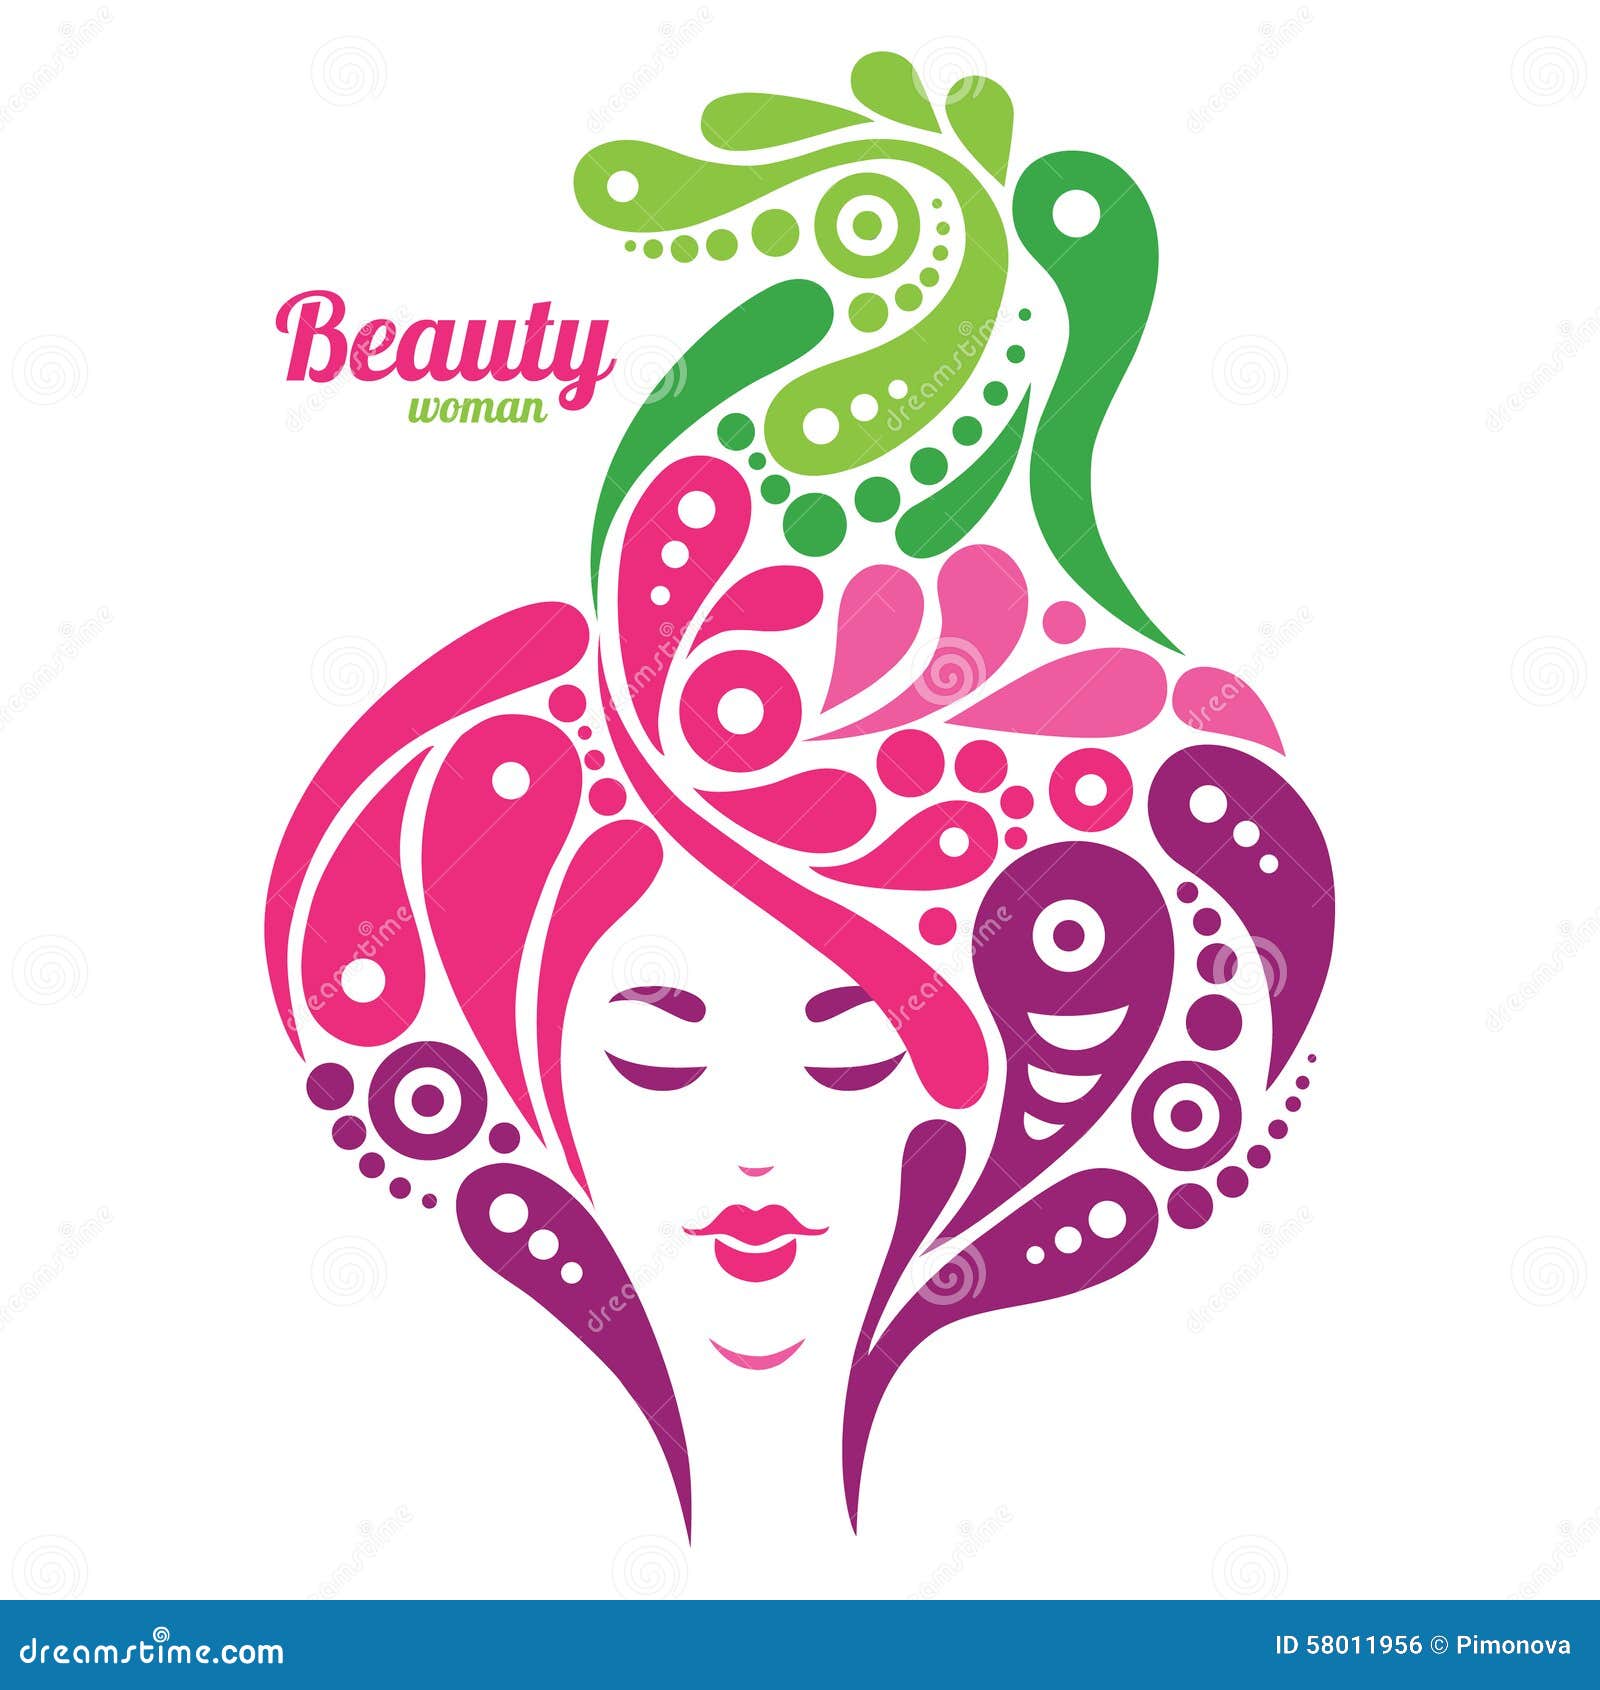 Beautiful Woman Silhouette. Tattoo Of Abstract Stock Vector - Image ...